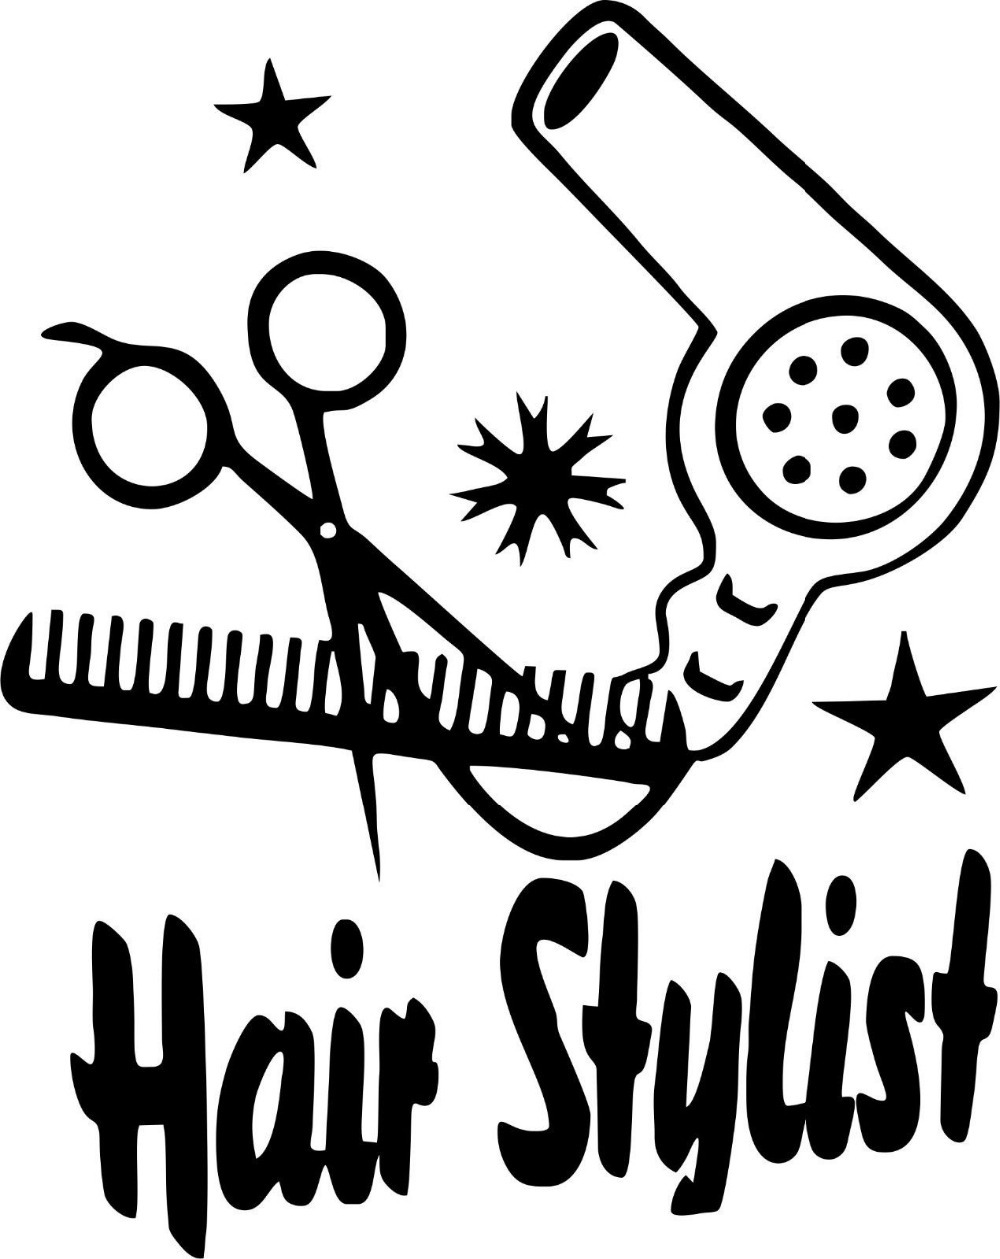 http://study.aisectonline.com/images/Assistant Hair Stylist.jpg